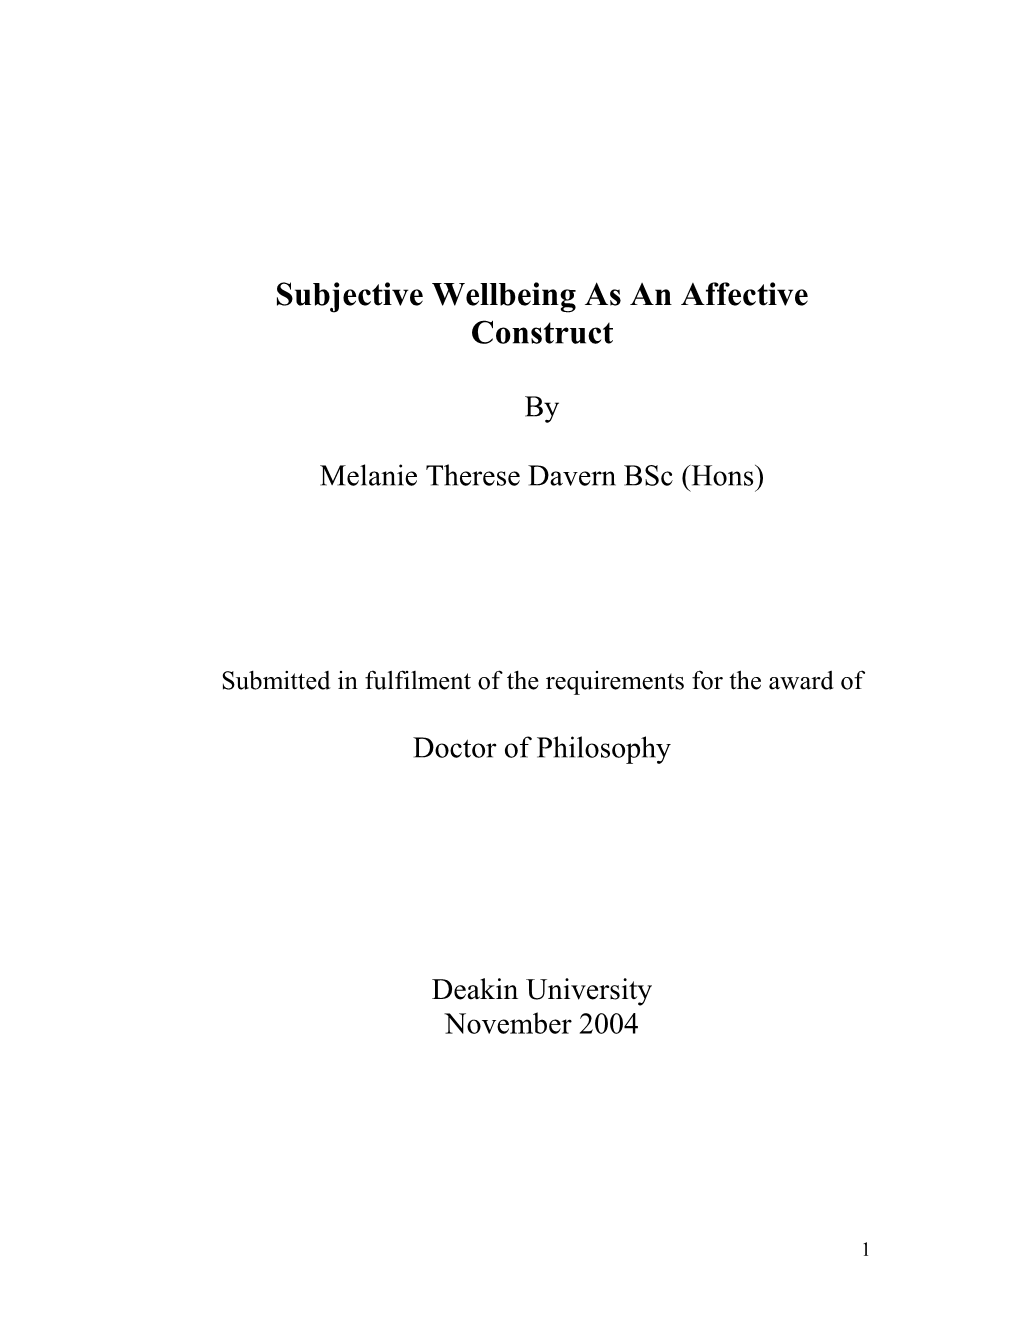 Thesis Entitled: Subjective Wellbeing As an Affective Construct